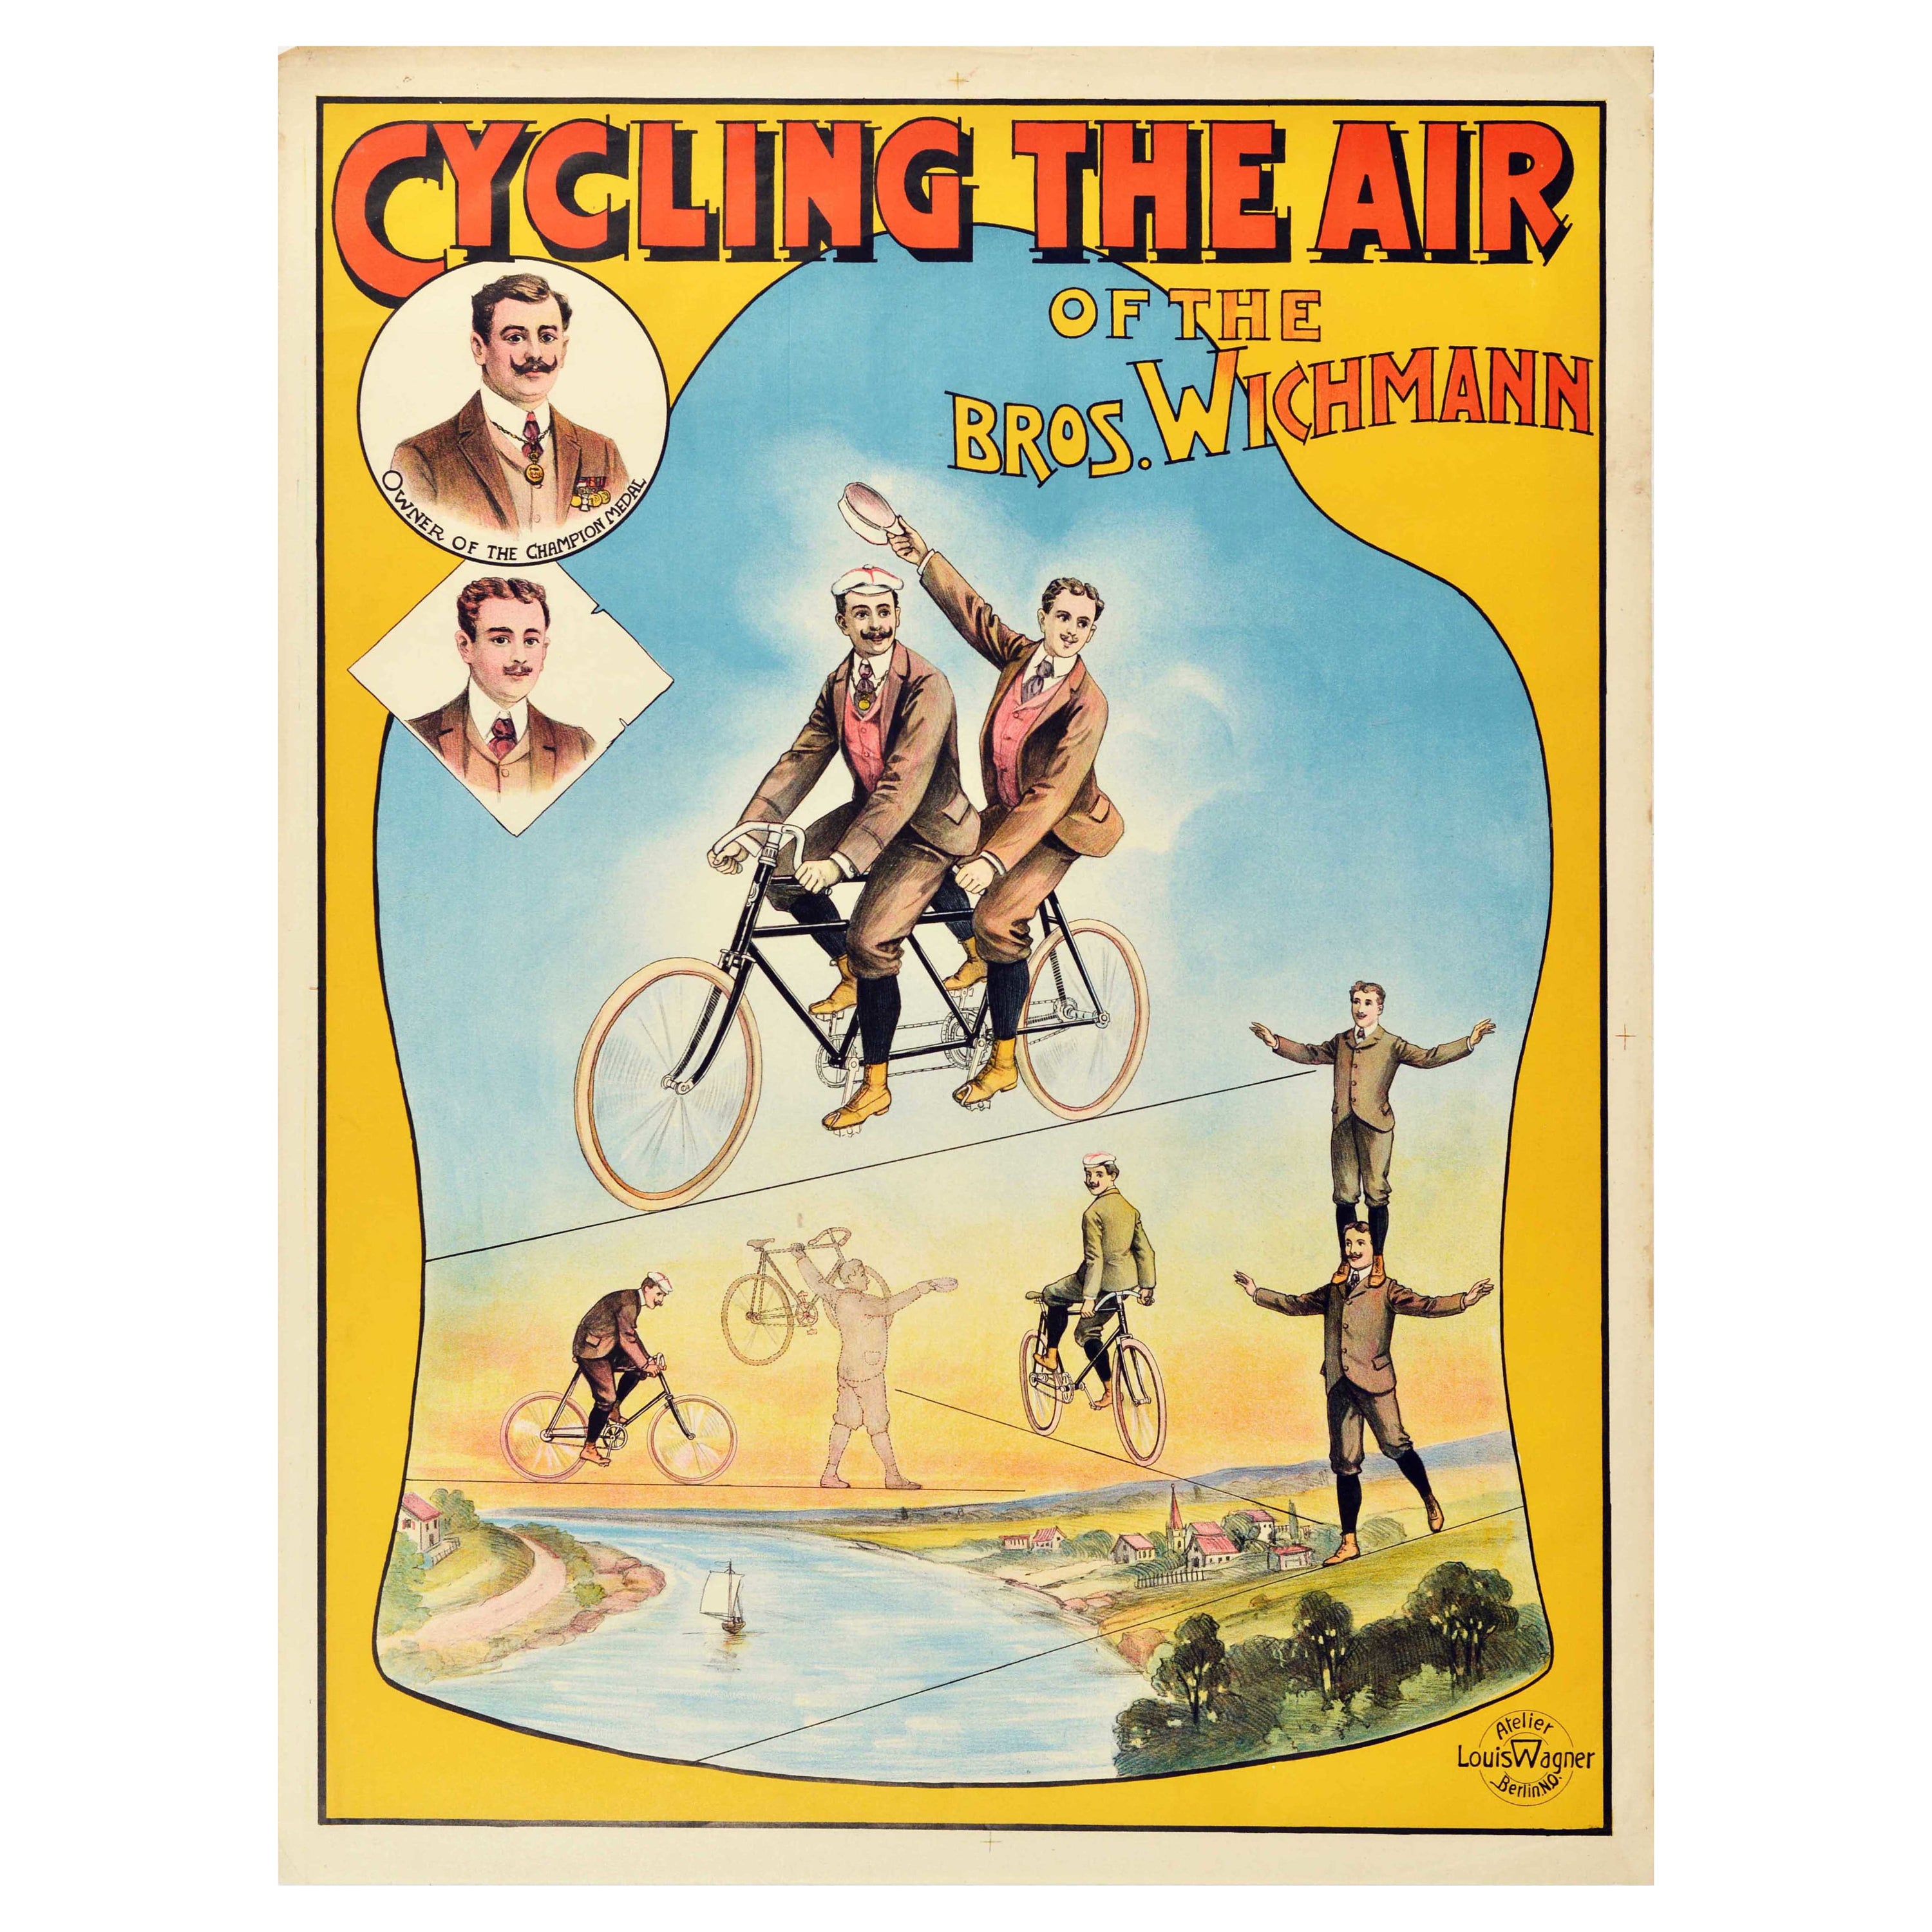 Original Antique Circus Advertising Poster Cycling The Air Bros Wichmann Design For Sale